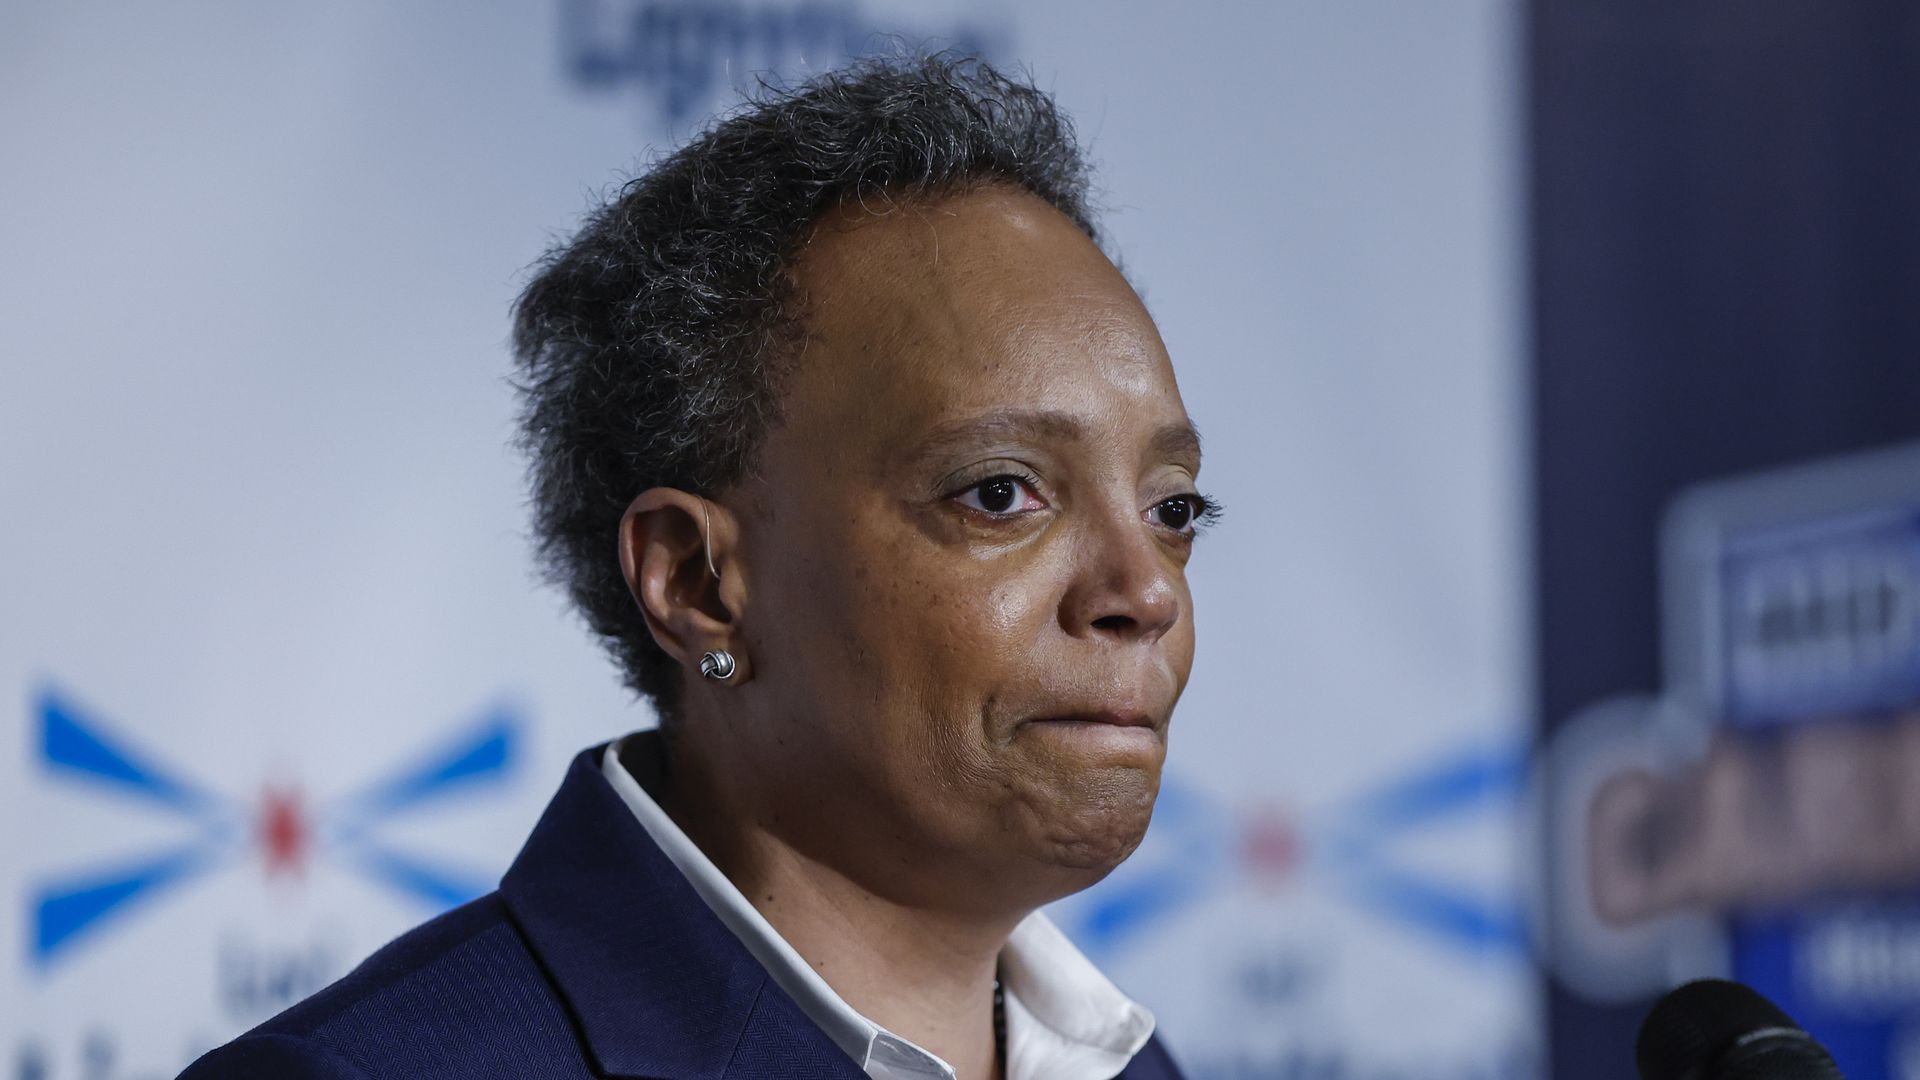  Chicago Mayor Lori Lightfoot reacts as she speaks during election night rally at Mid-America Carpenters Regional Council on February 28, 2023 in Chicago, Illinois.